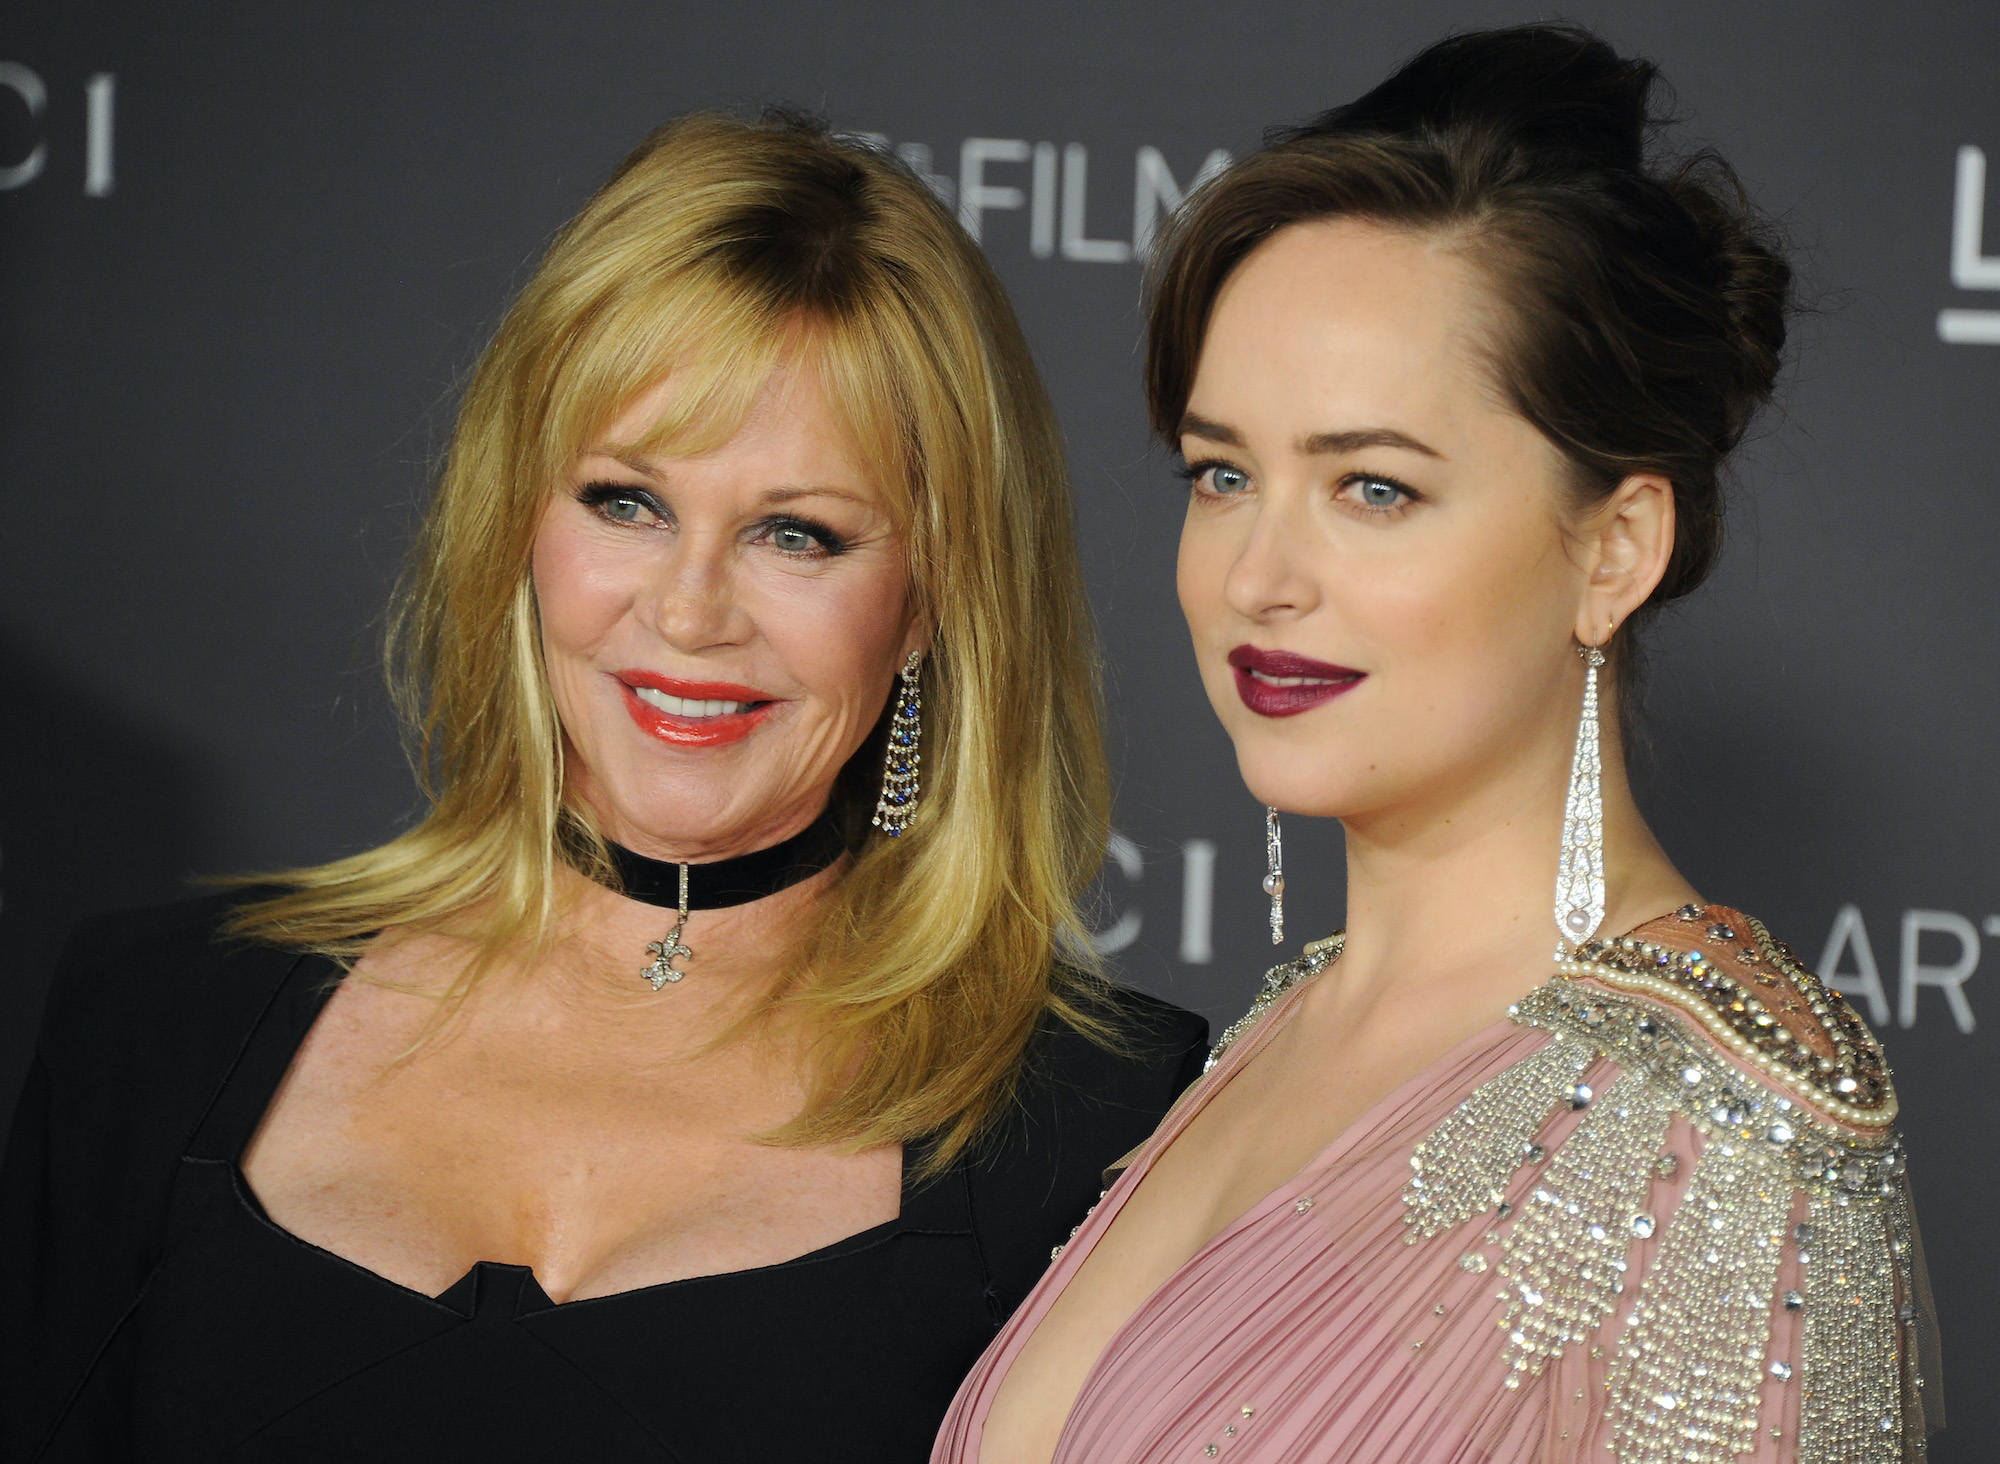 Capable rival to Ross - The divorce force: Melanie Griffith.